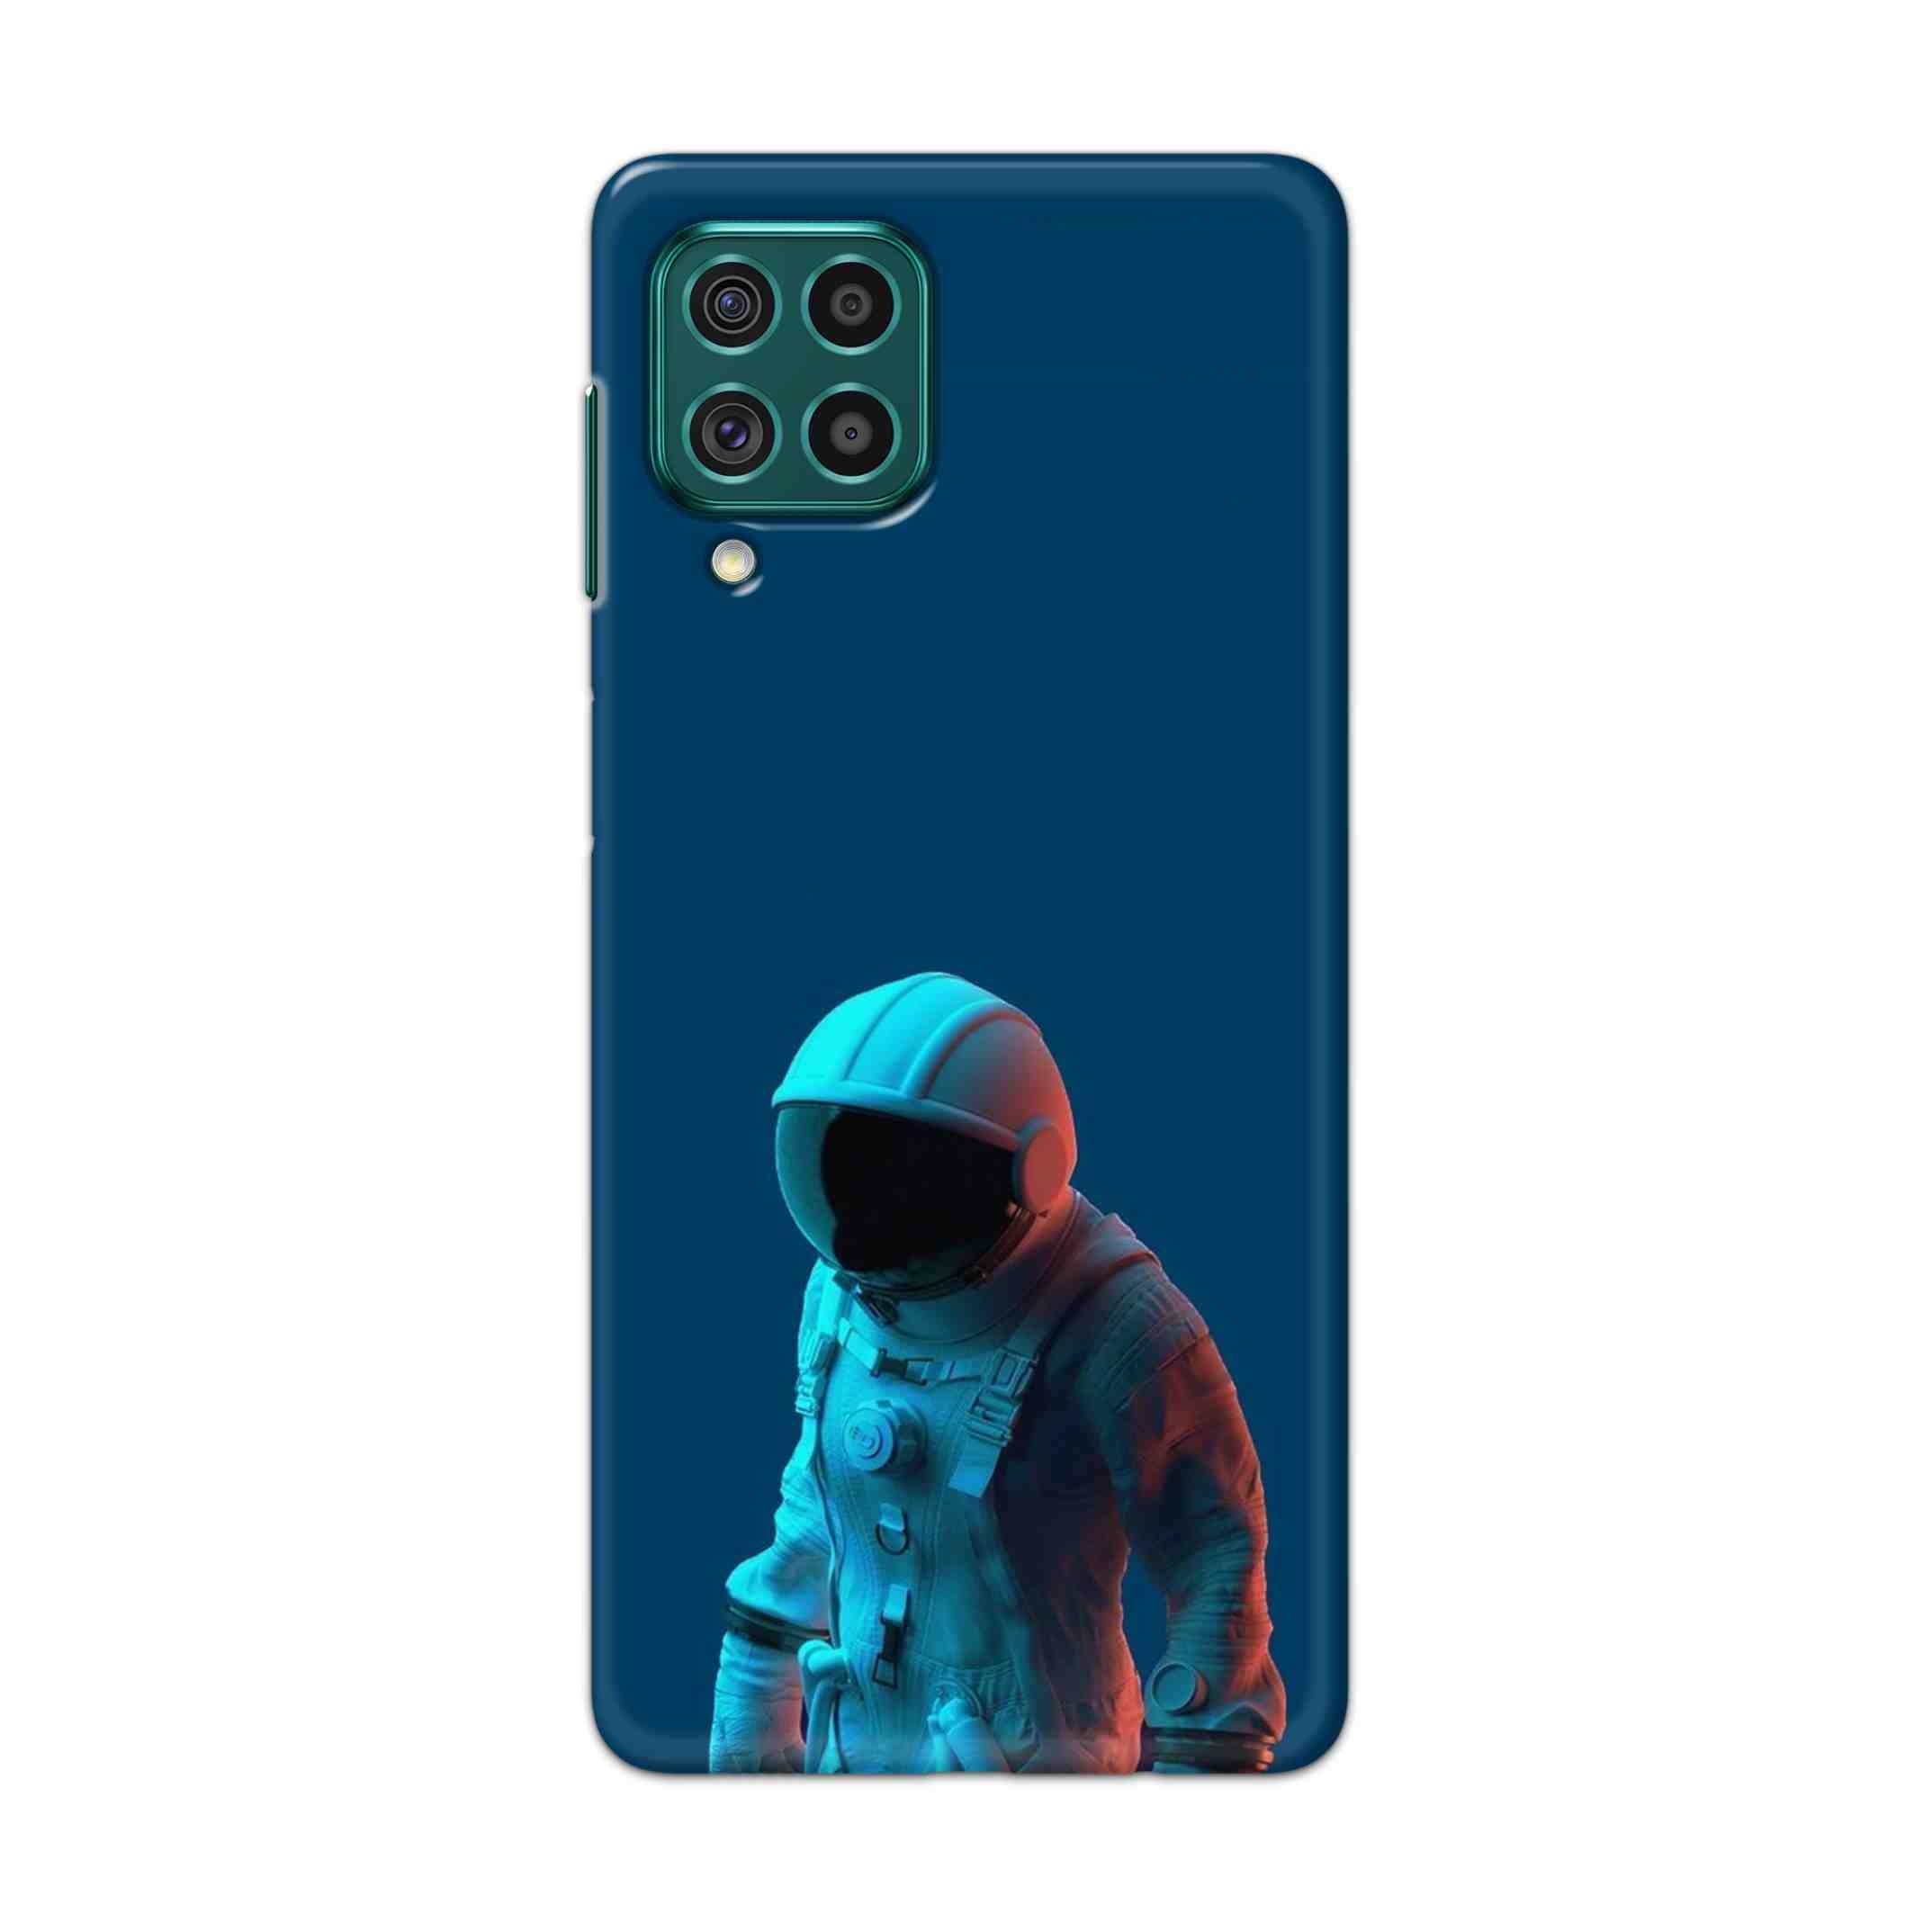 Buy Blue Astronaut Hard Back Mobile Phone Case Cover For Galaxy F62 Online